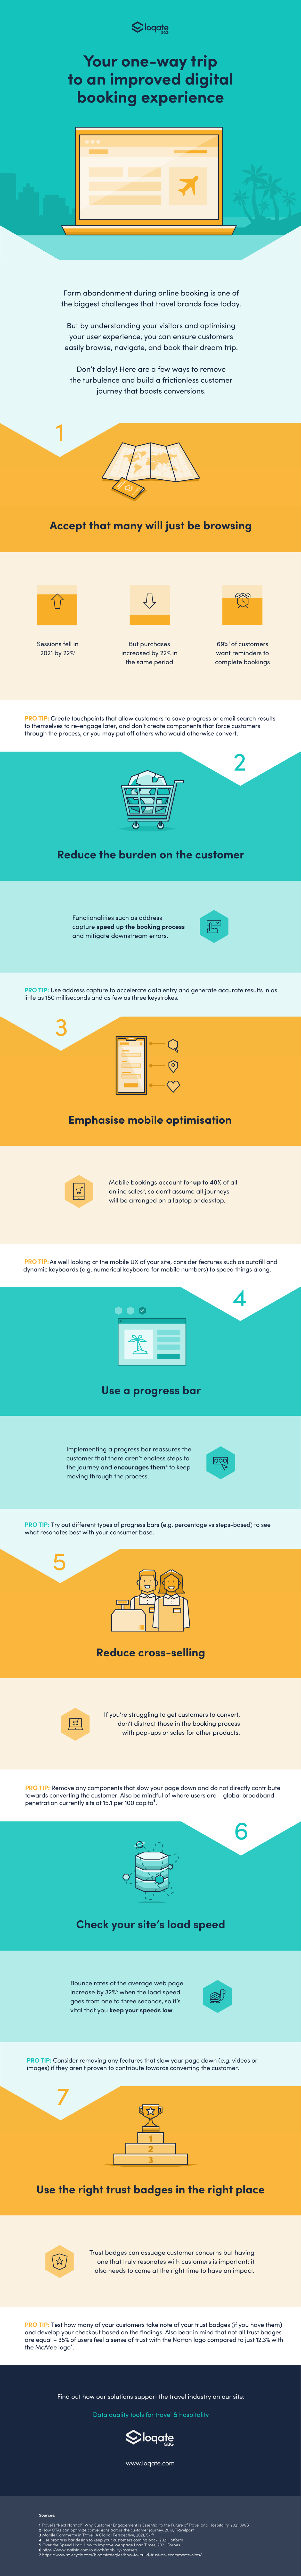 Infographic on improving conversion rates in the Travel Industry by Loqate